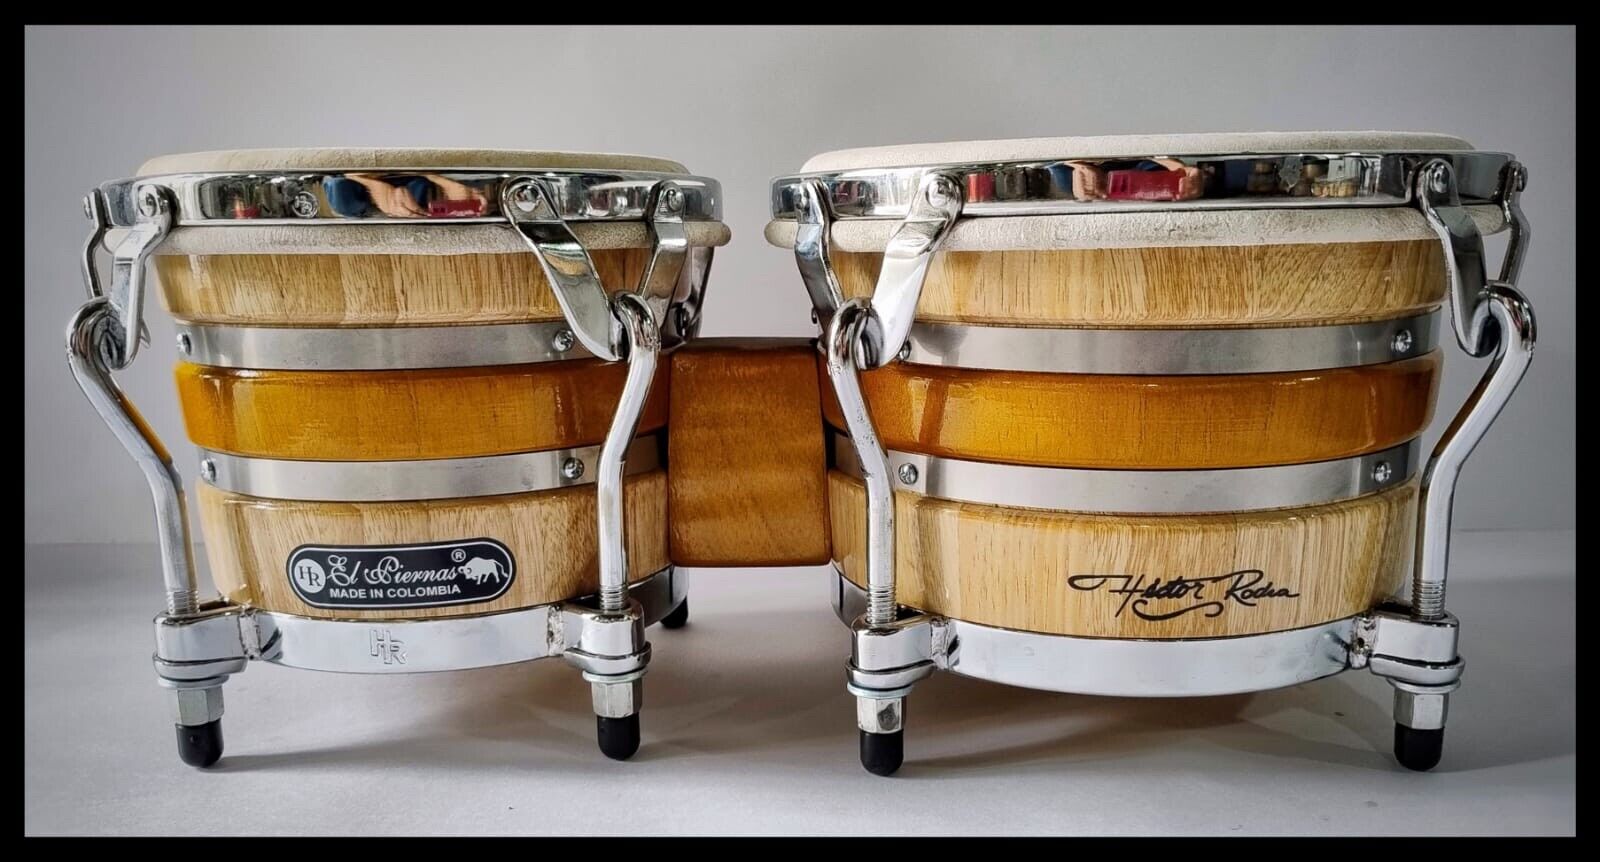 This Is A Set Hand Made HR El piernas Bongo From Colombia Natural Wood 1